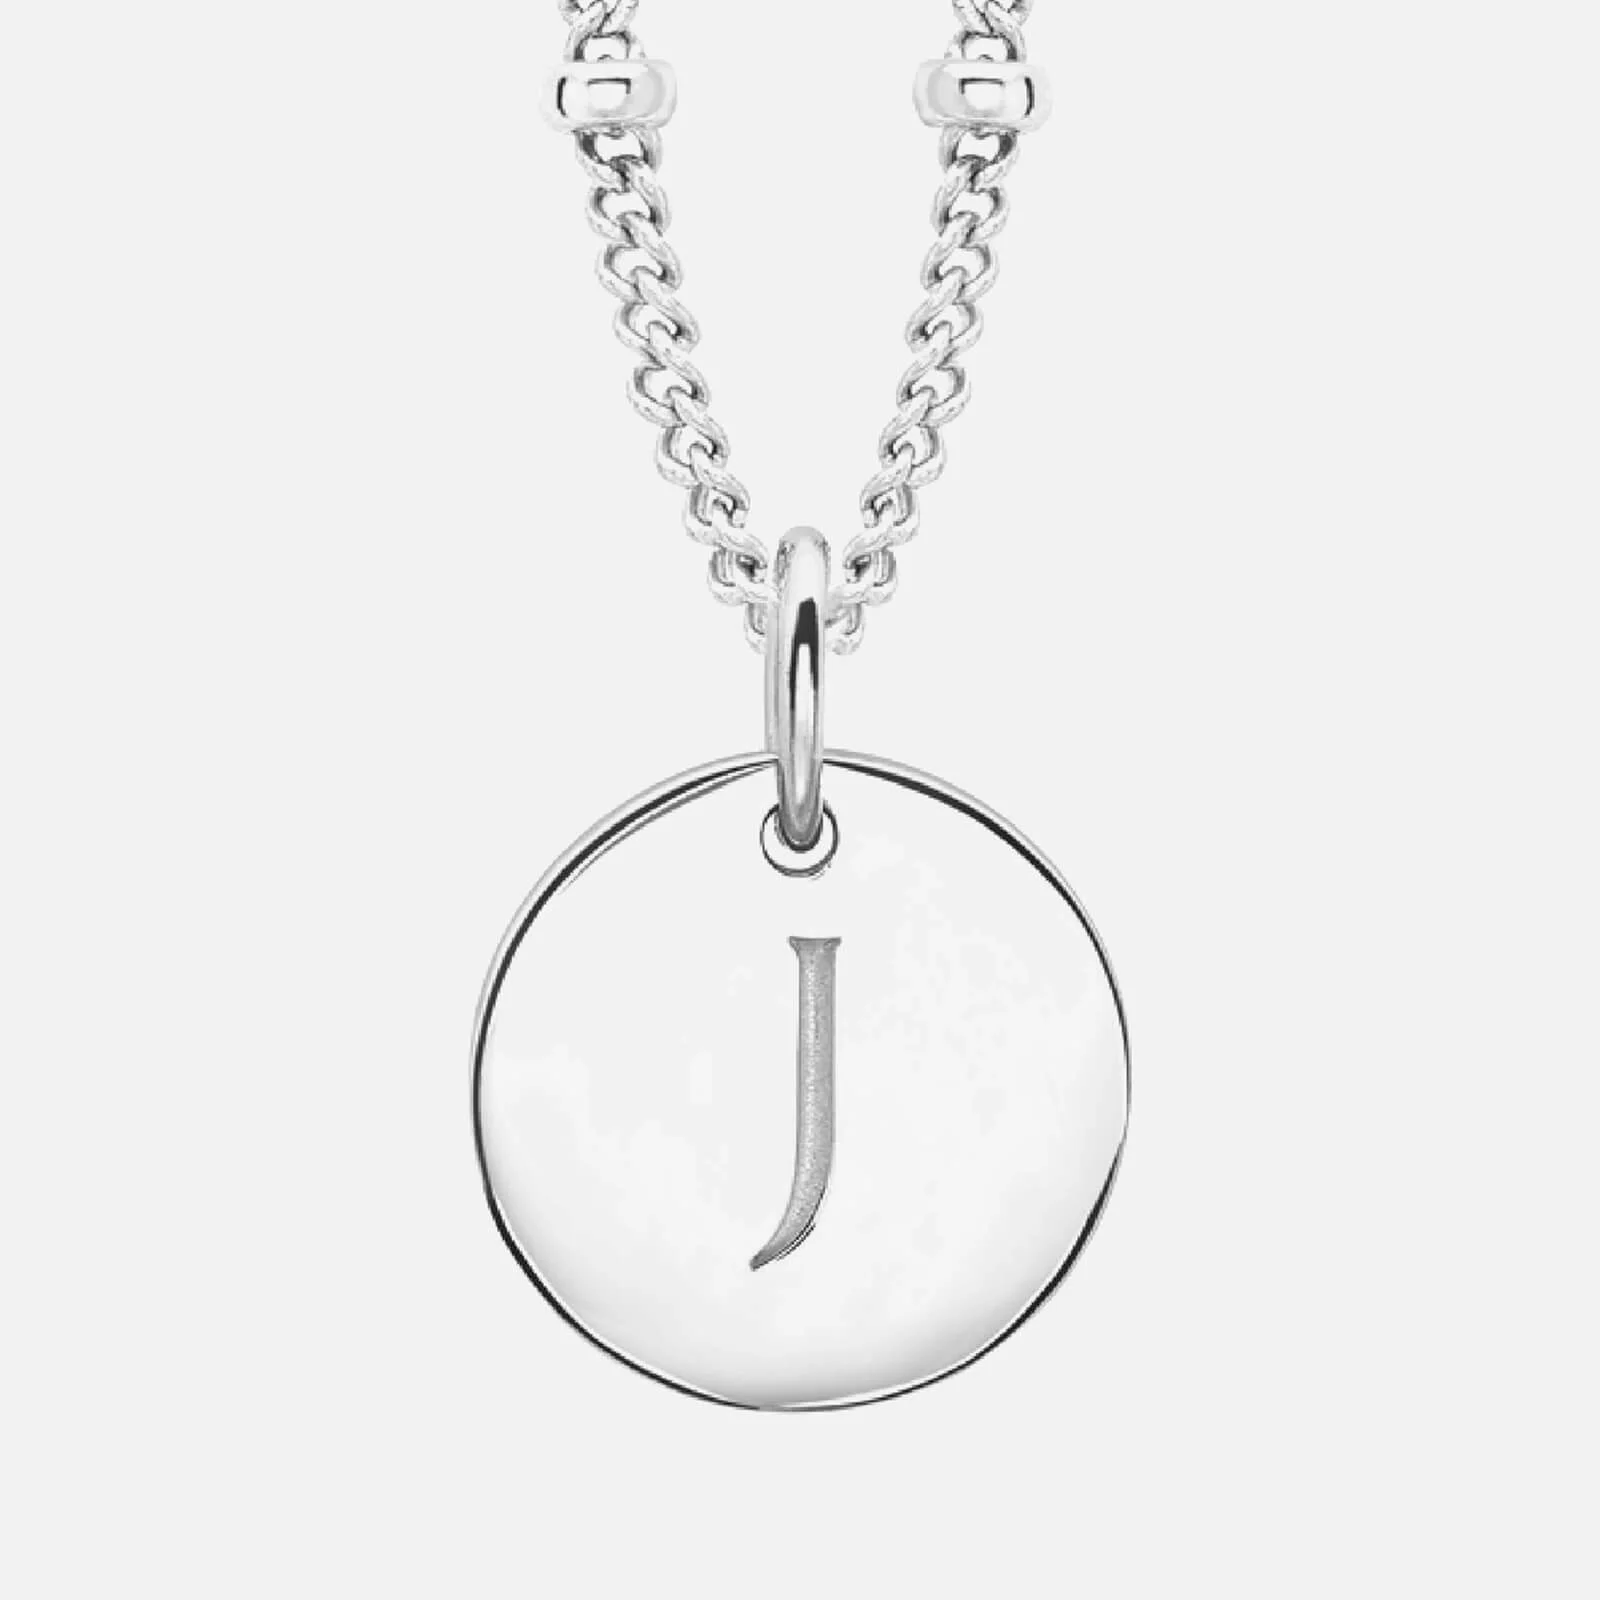 Missoma Women's Initial Charm Necklace - J - Silver Image 1